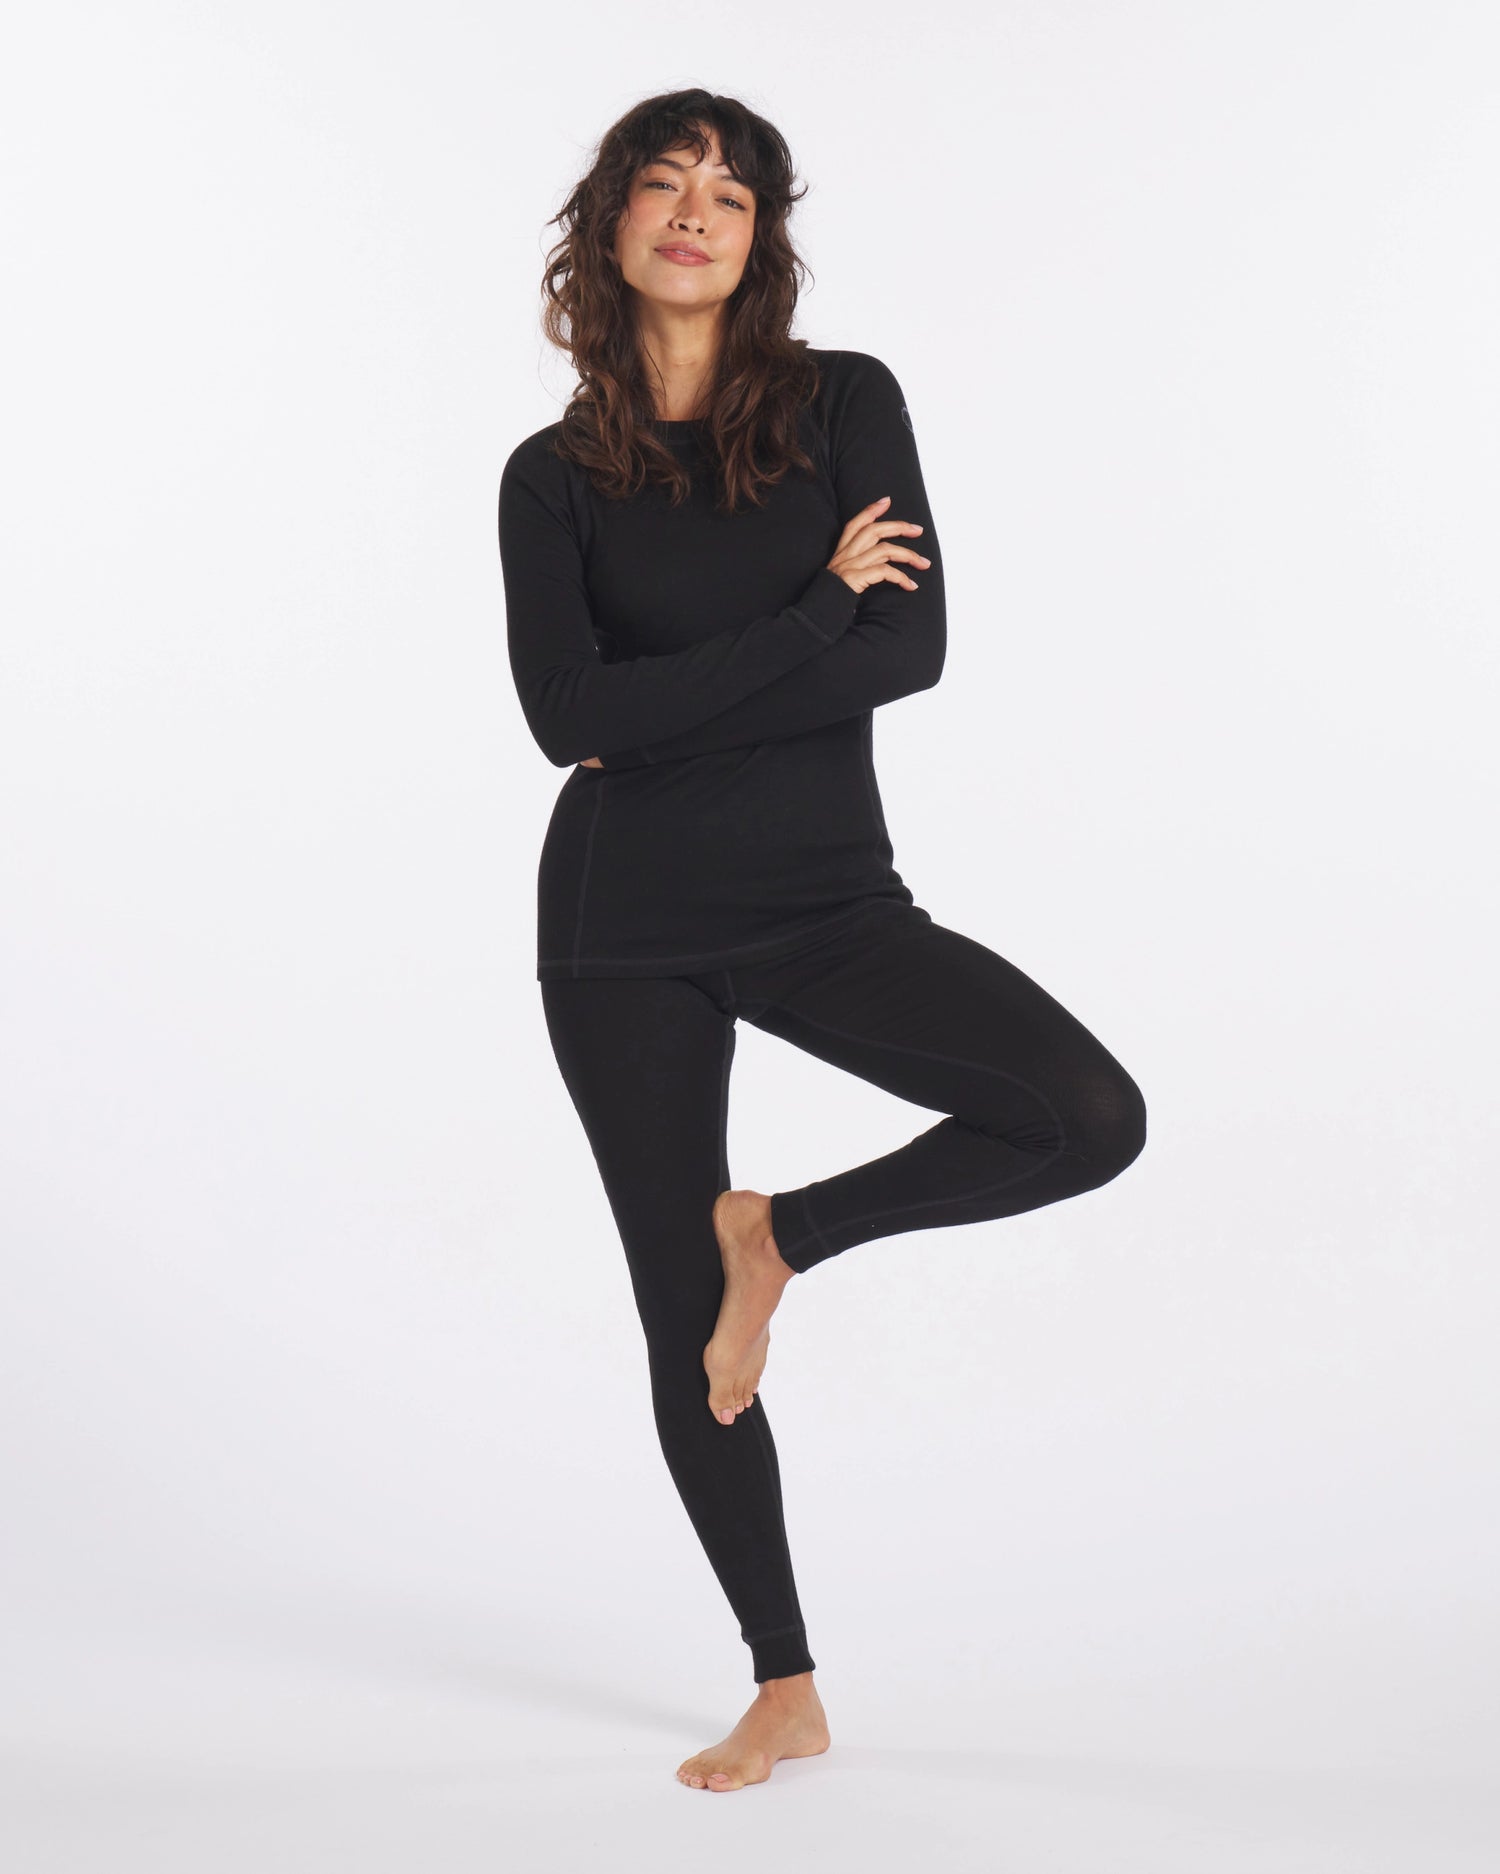 Women's thermals base layer bottoms